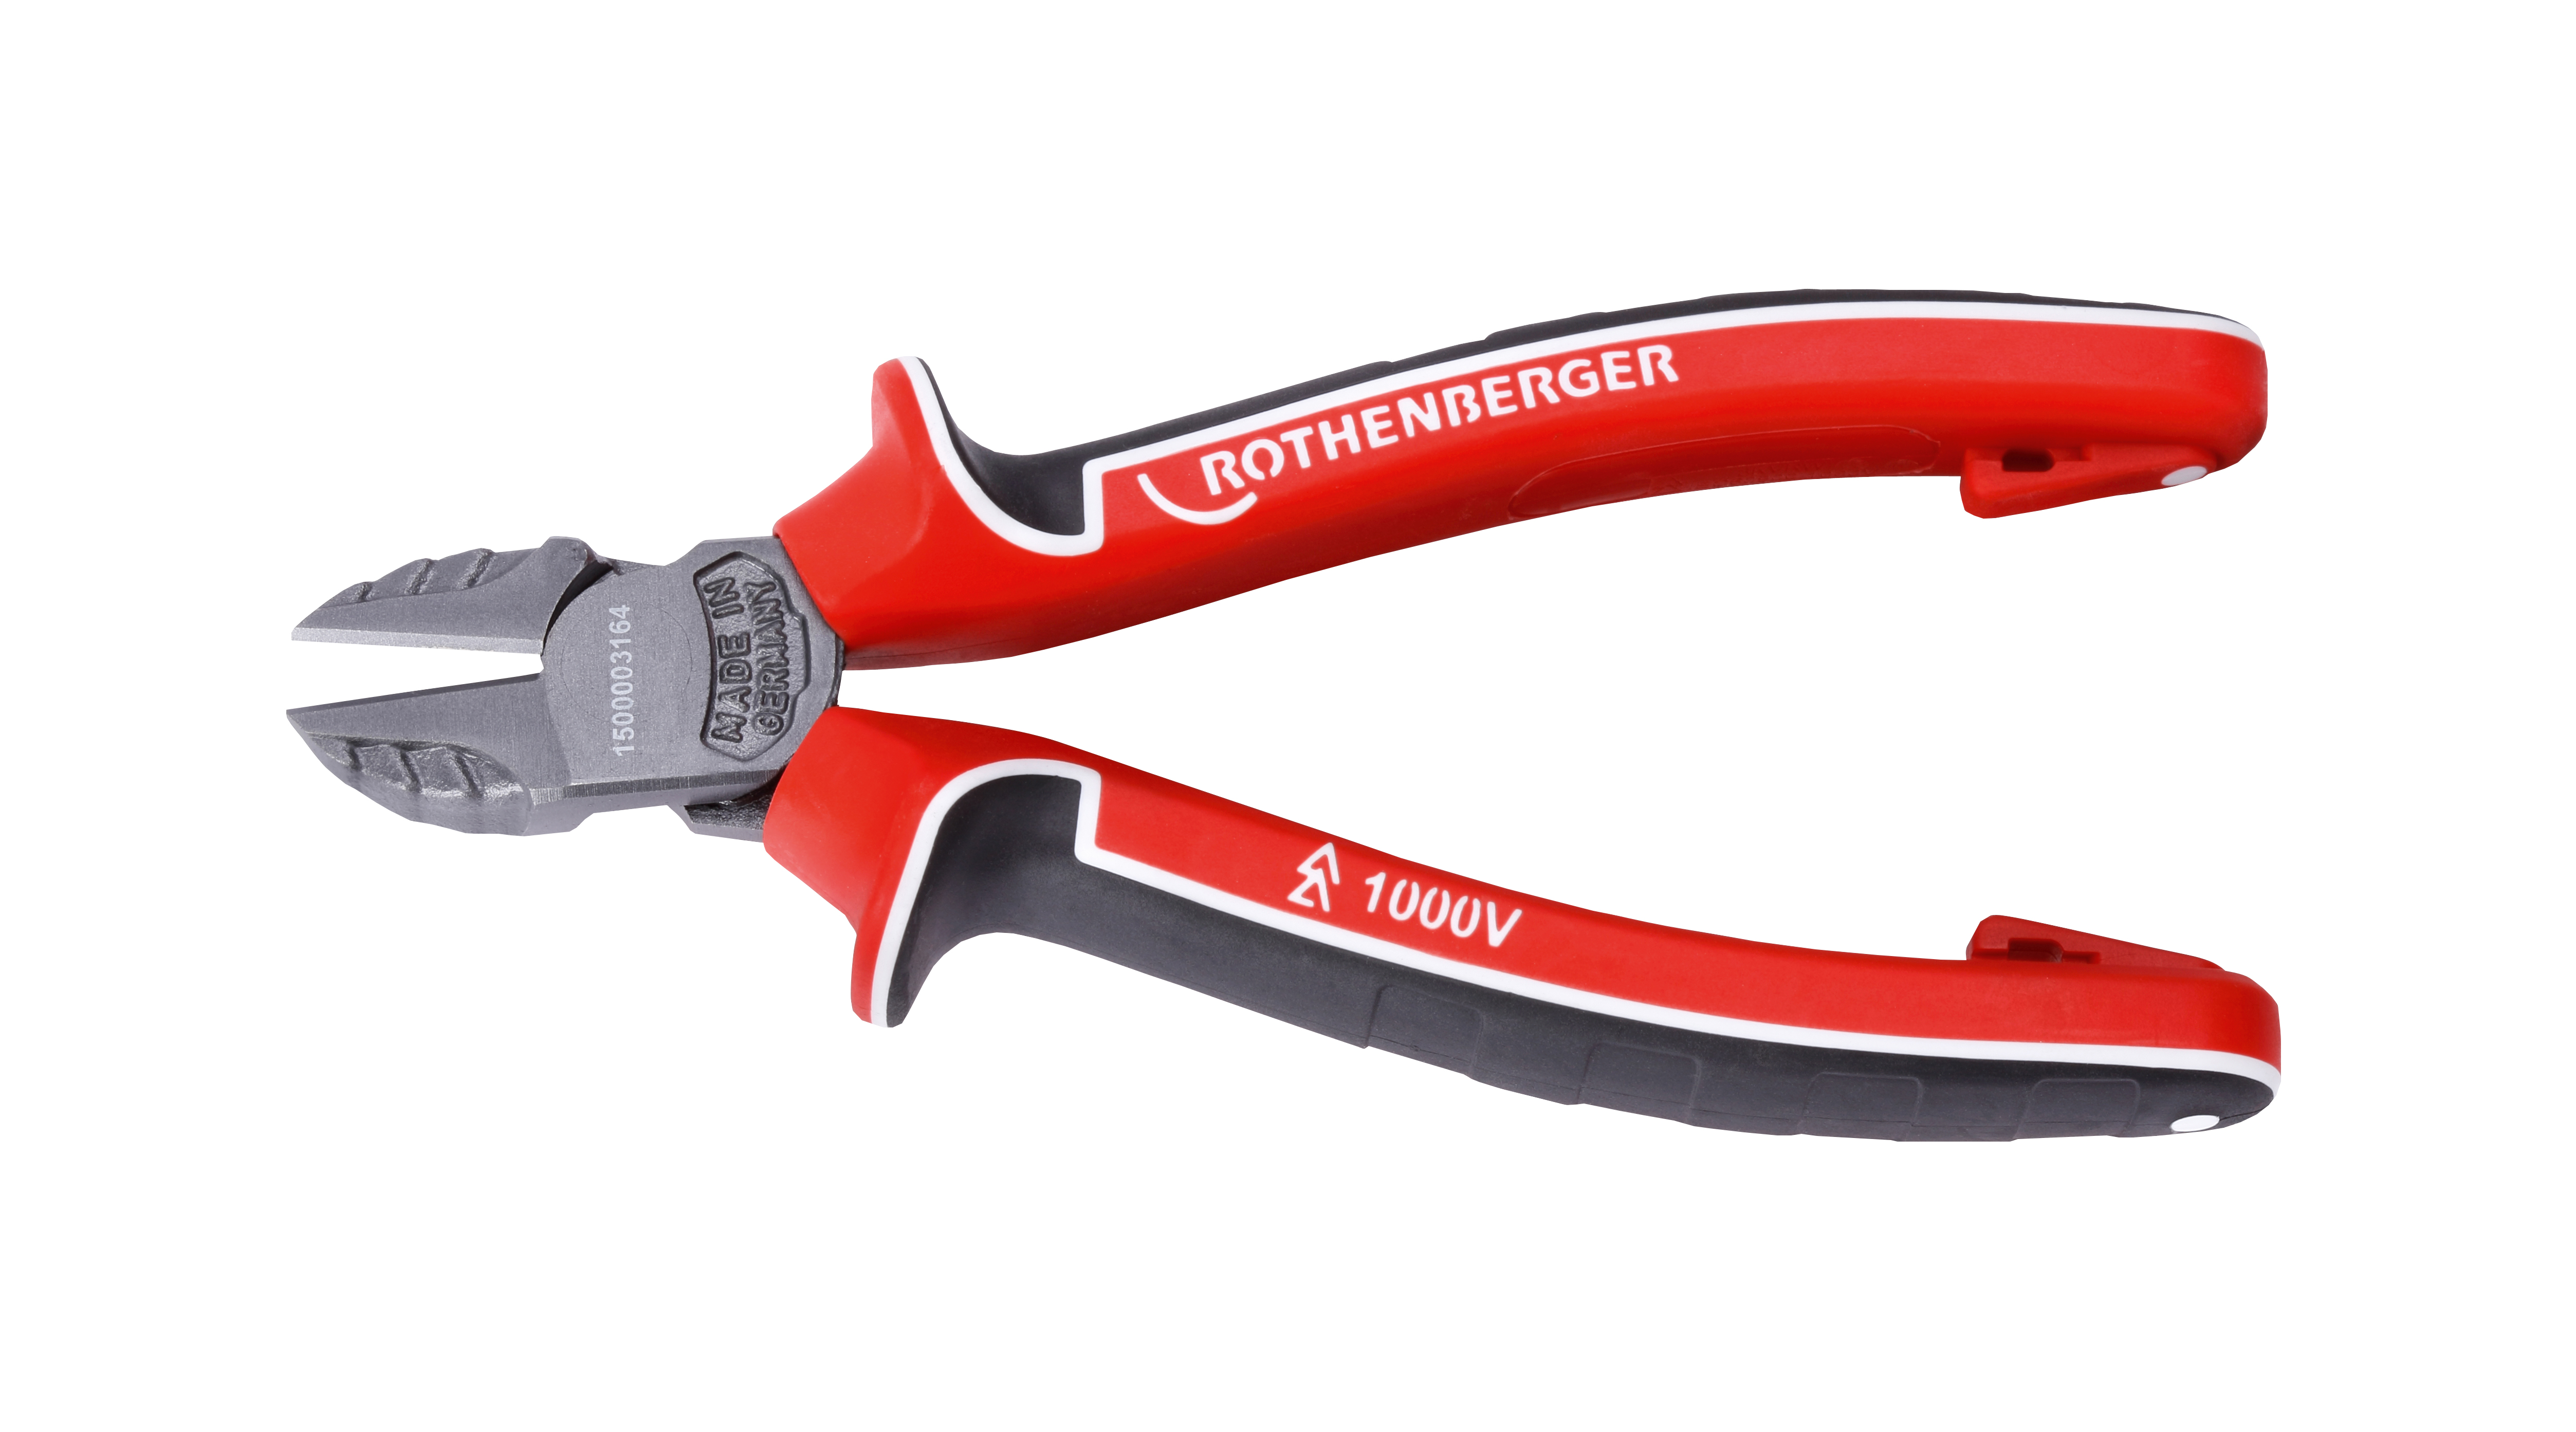 ROTHENBERGER ELECTRICAL SIDE WIRE CUTTER 160MM